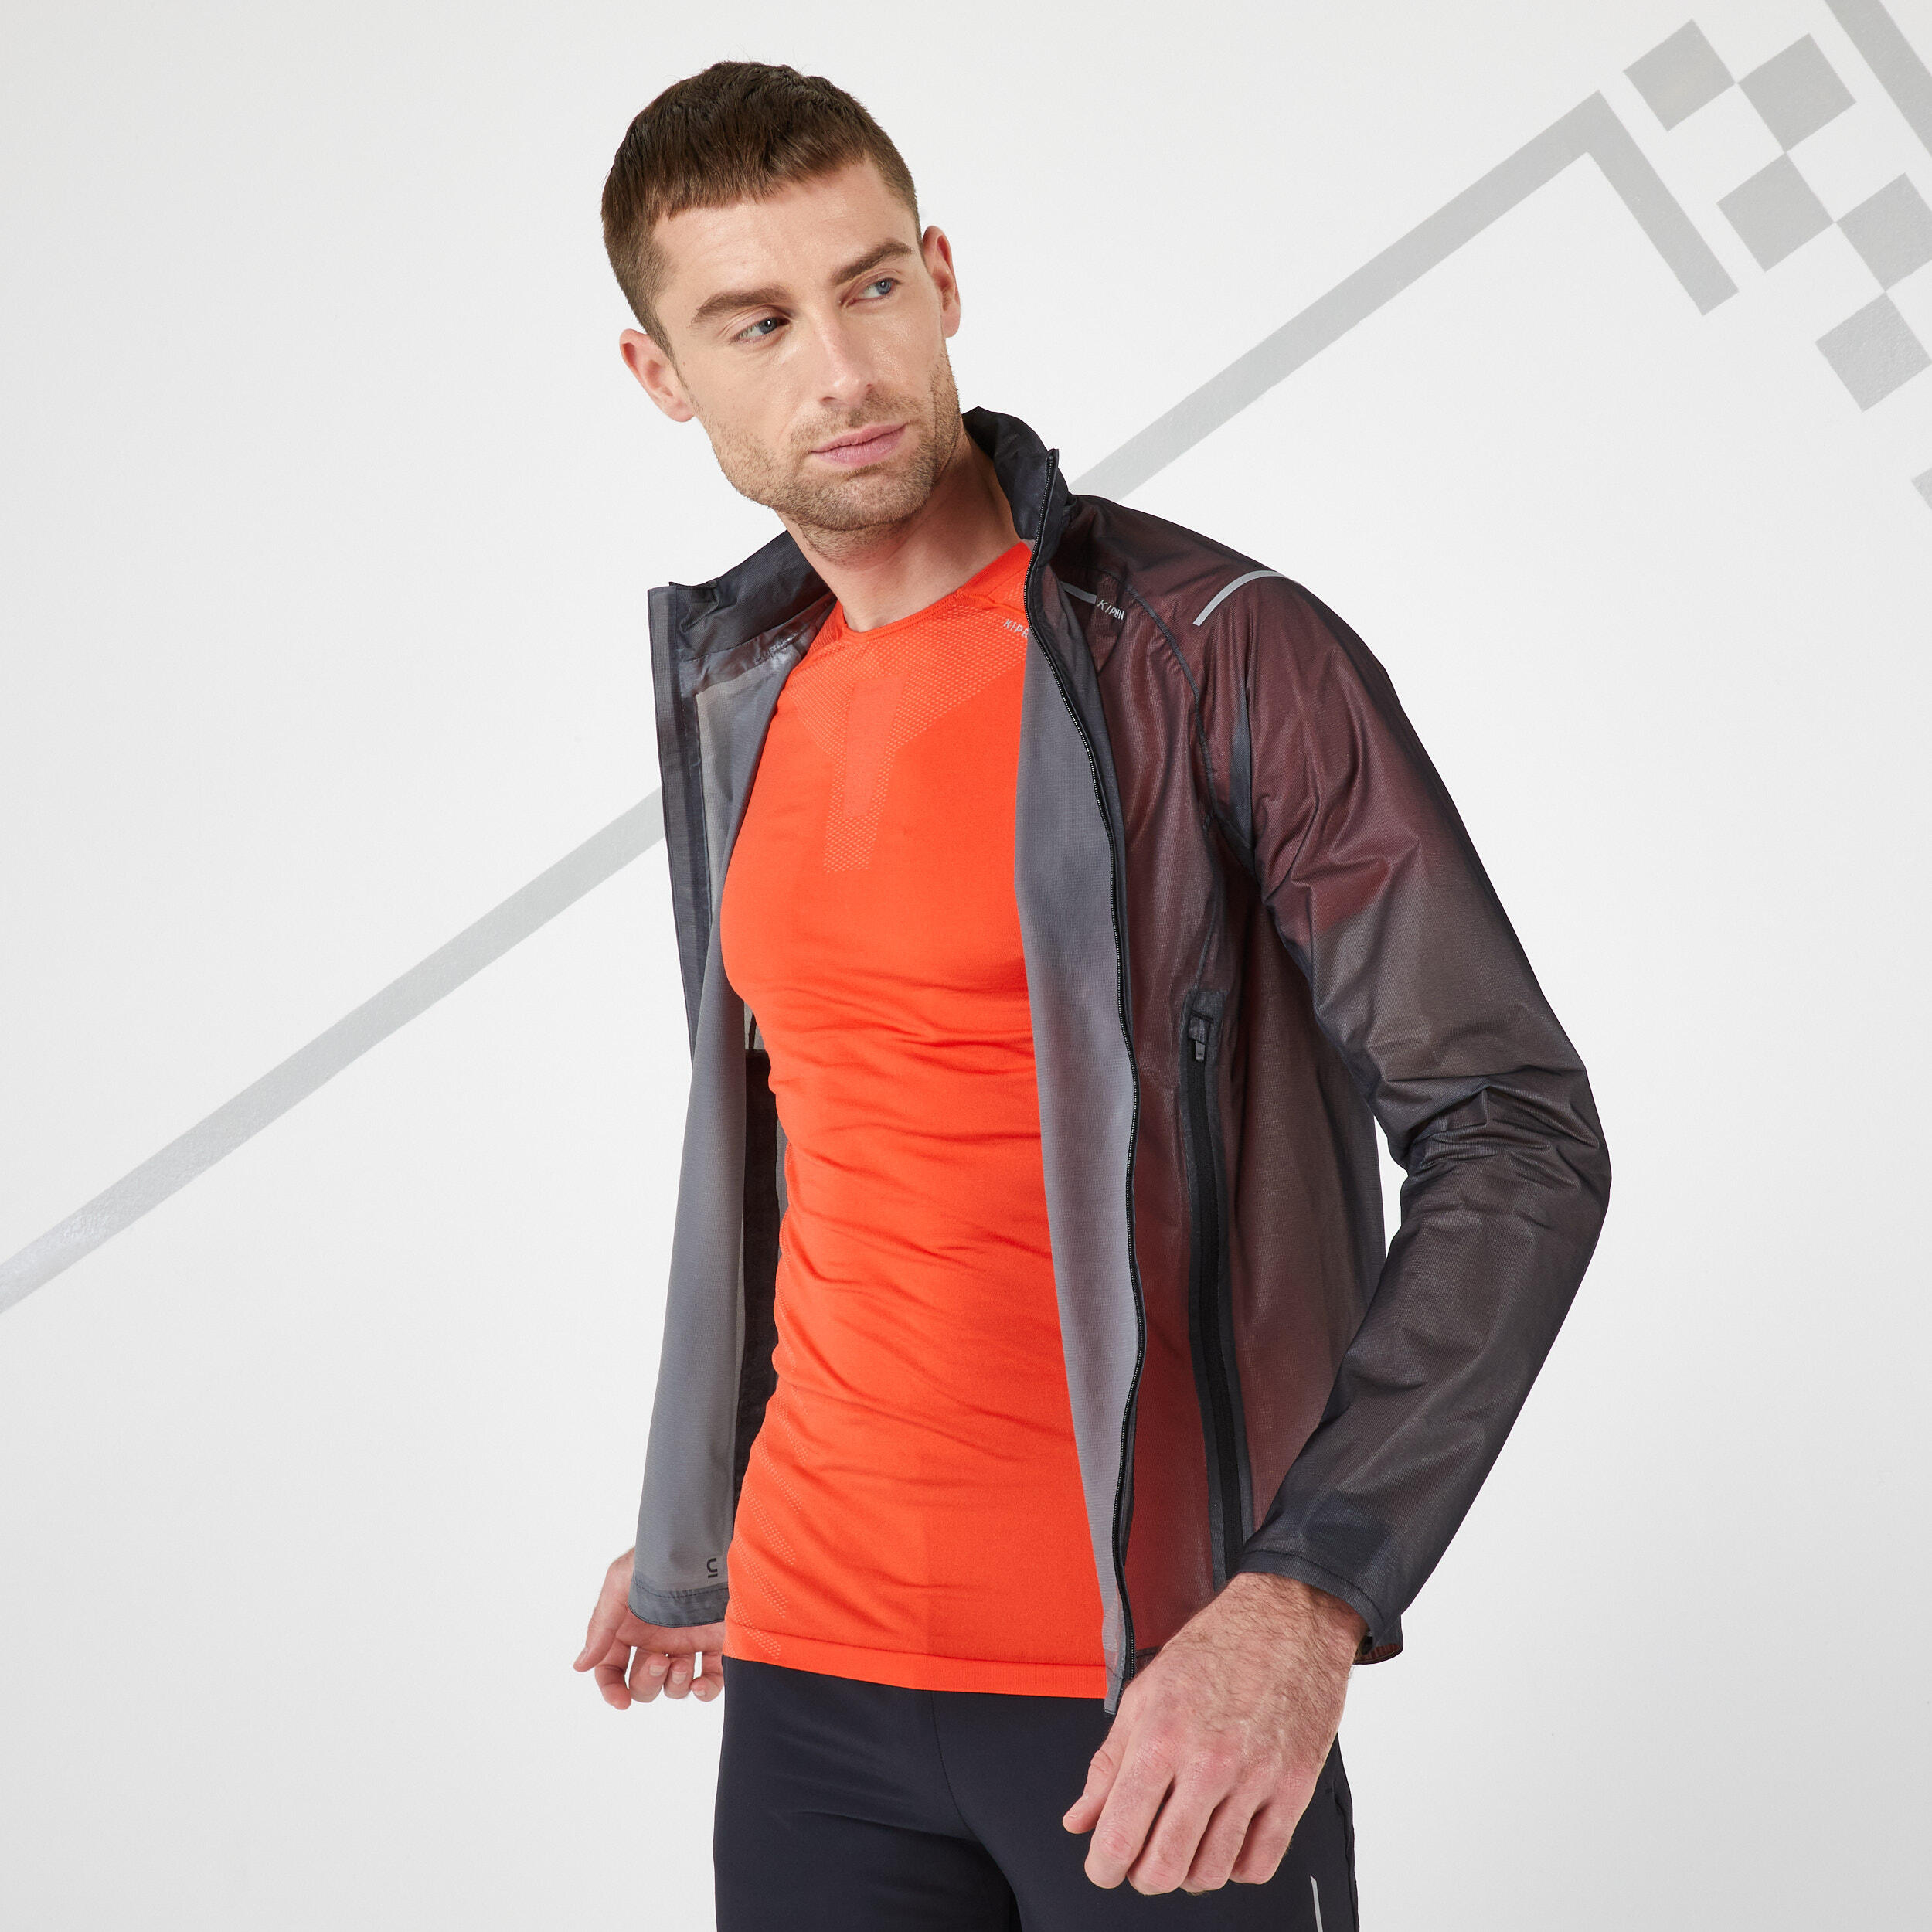 Kalenji Play Running Jacket, Large : Amazon.in: Clothing & Accessories